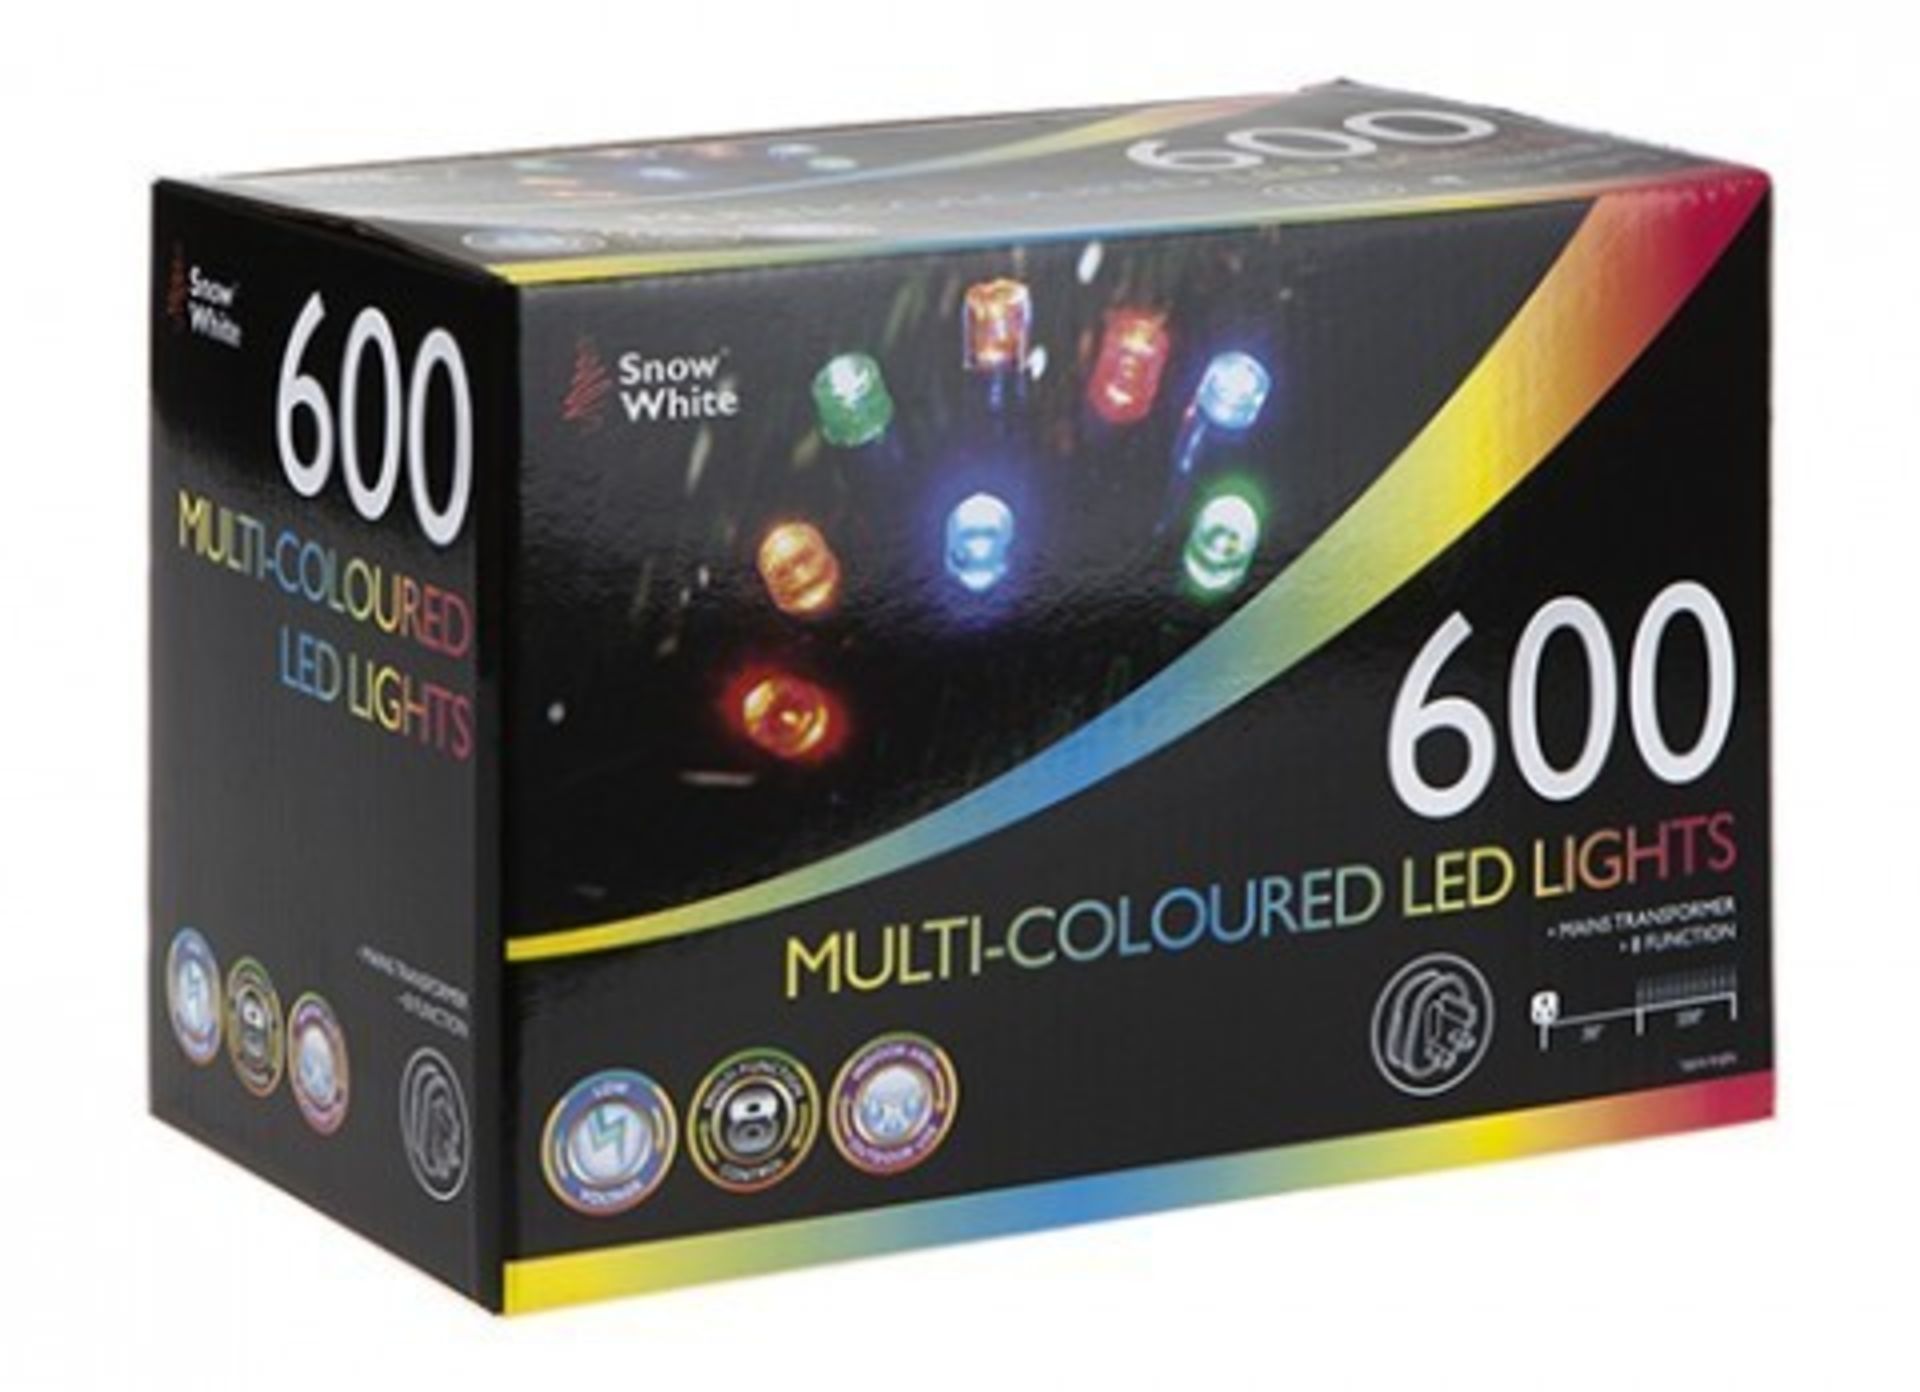 + VAT Brand New 600 Multi Coloured Mains Operated LED Lights - 8 Function - Mains Transformer